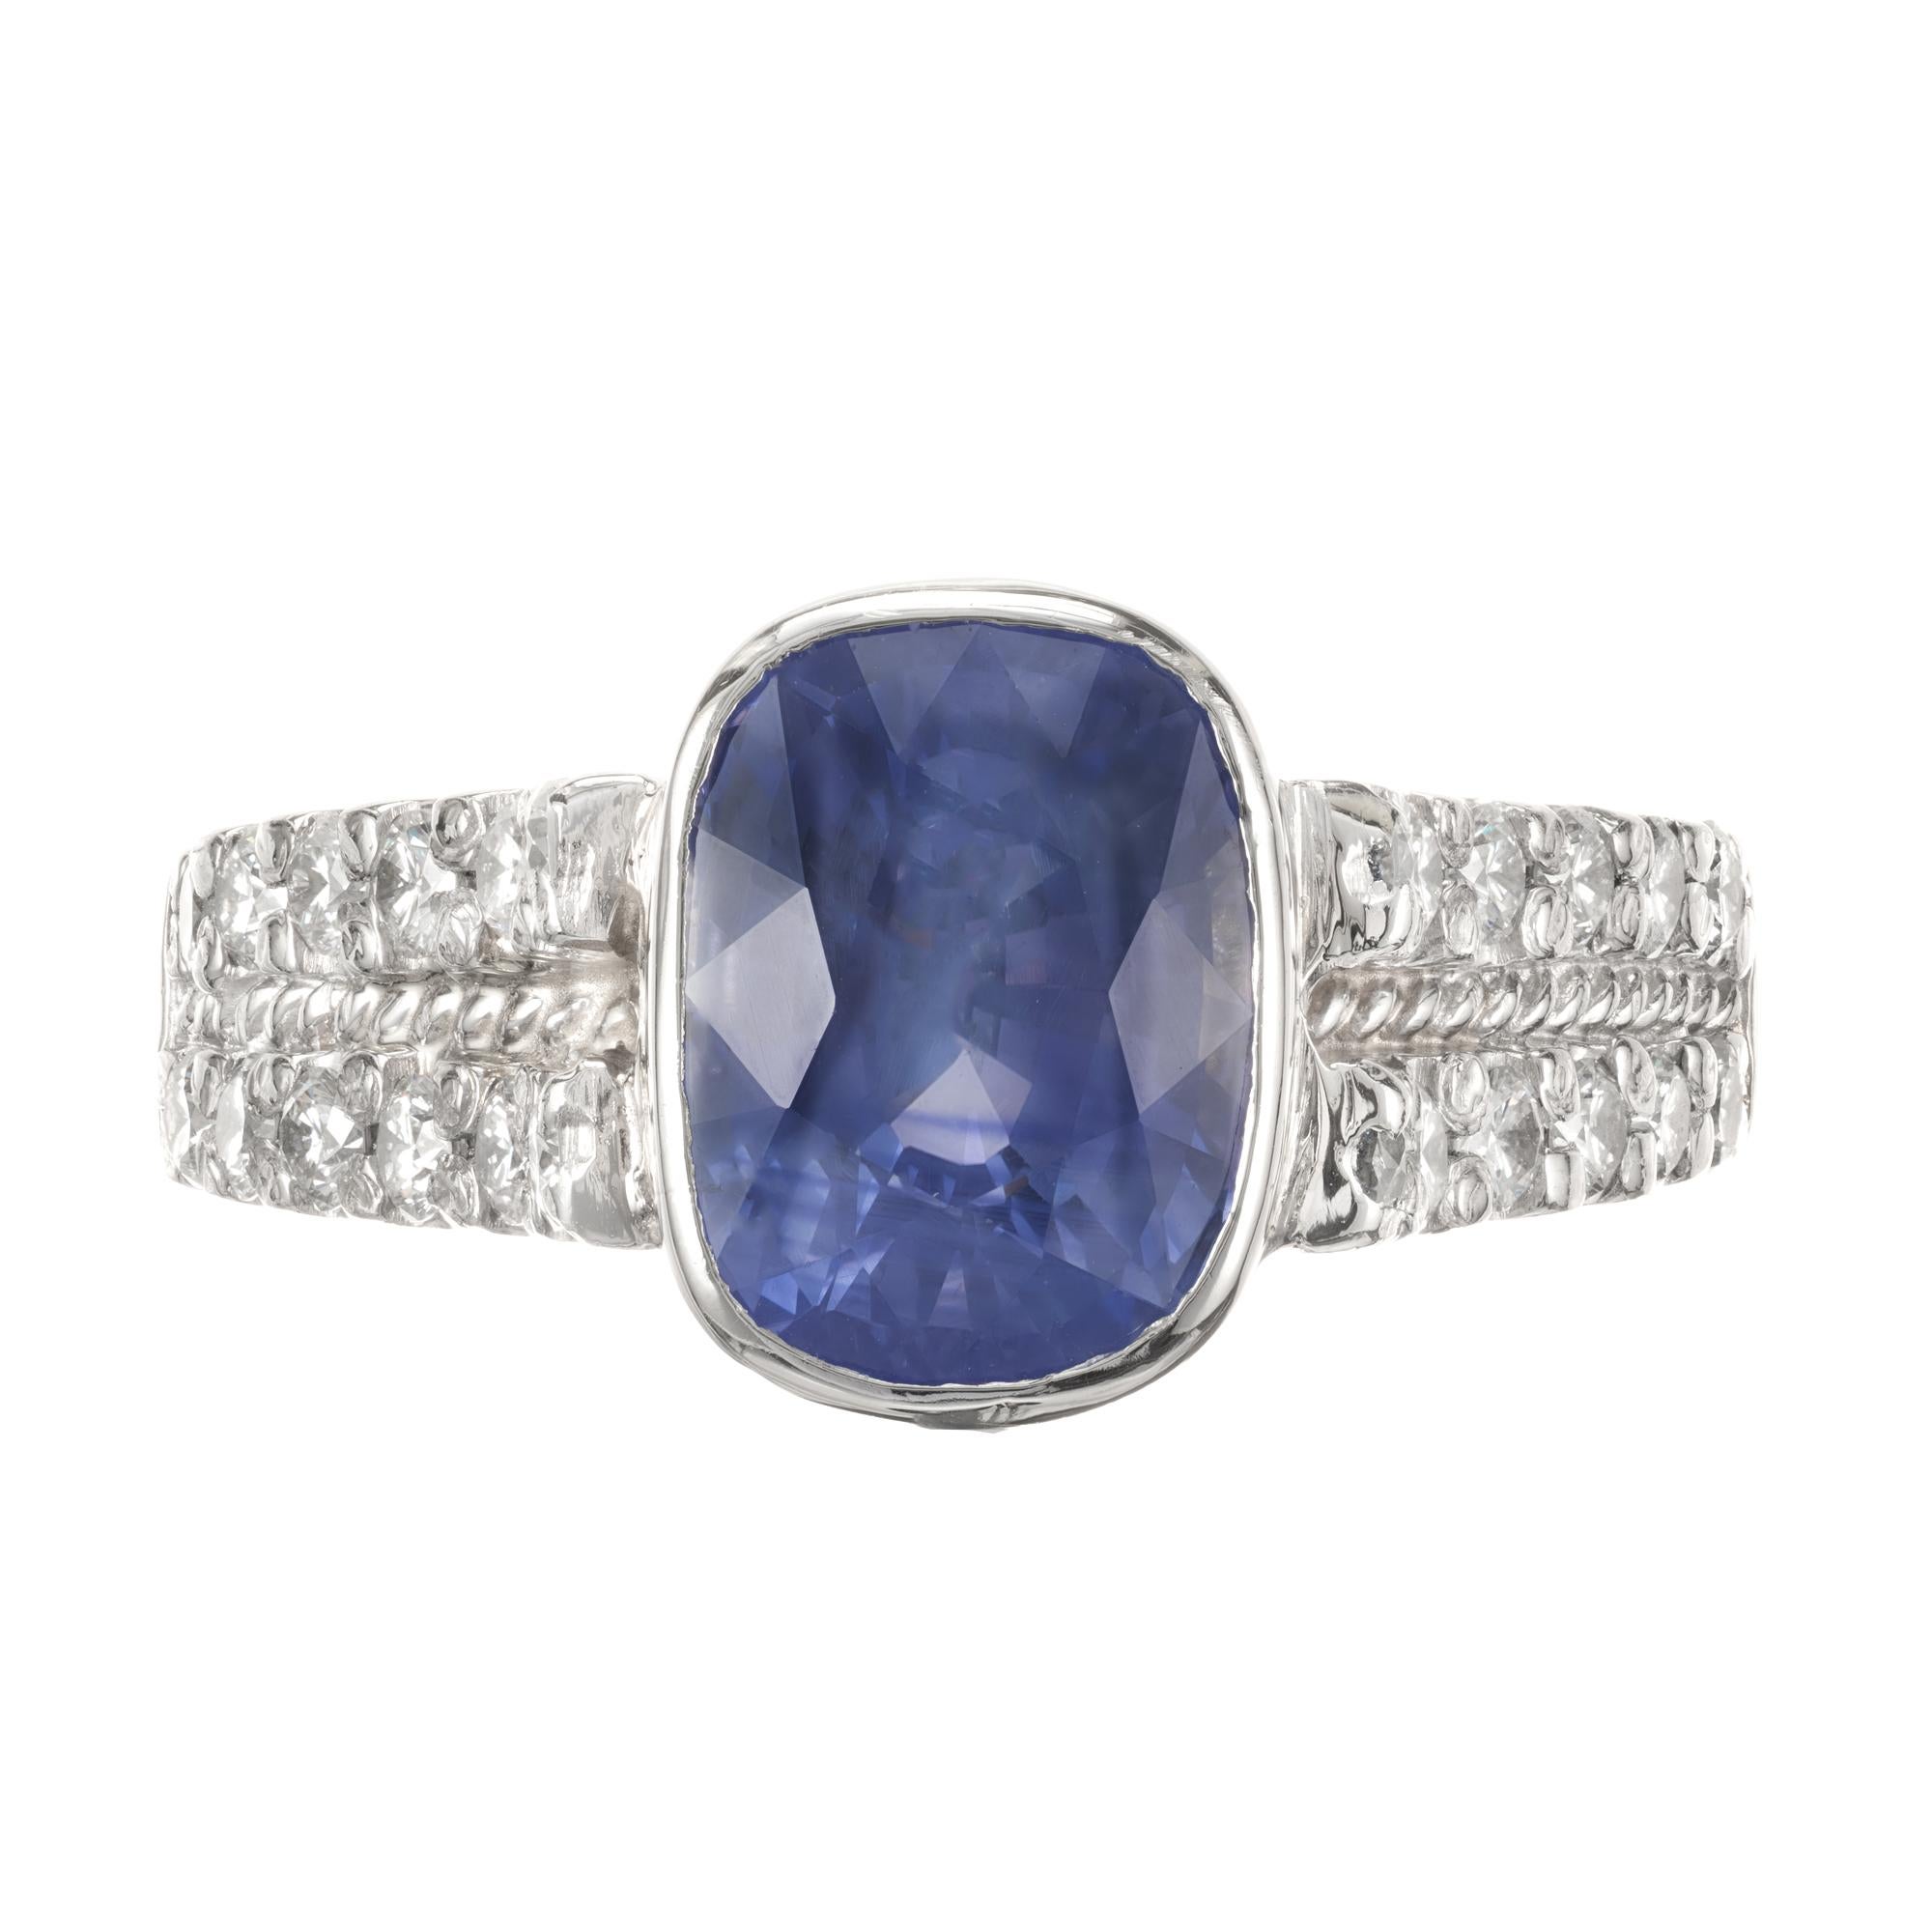 Antique cushion cut soft medium blue genuine Ceylon sapphire and diamond engagement ring. GIA Certified center stone. Natural color, simple heat only, no other enhancements GIA # 2155636352. Platinum ring with two rows of diamonds that come up to